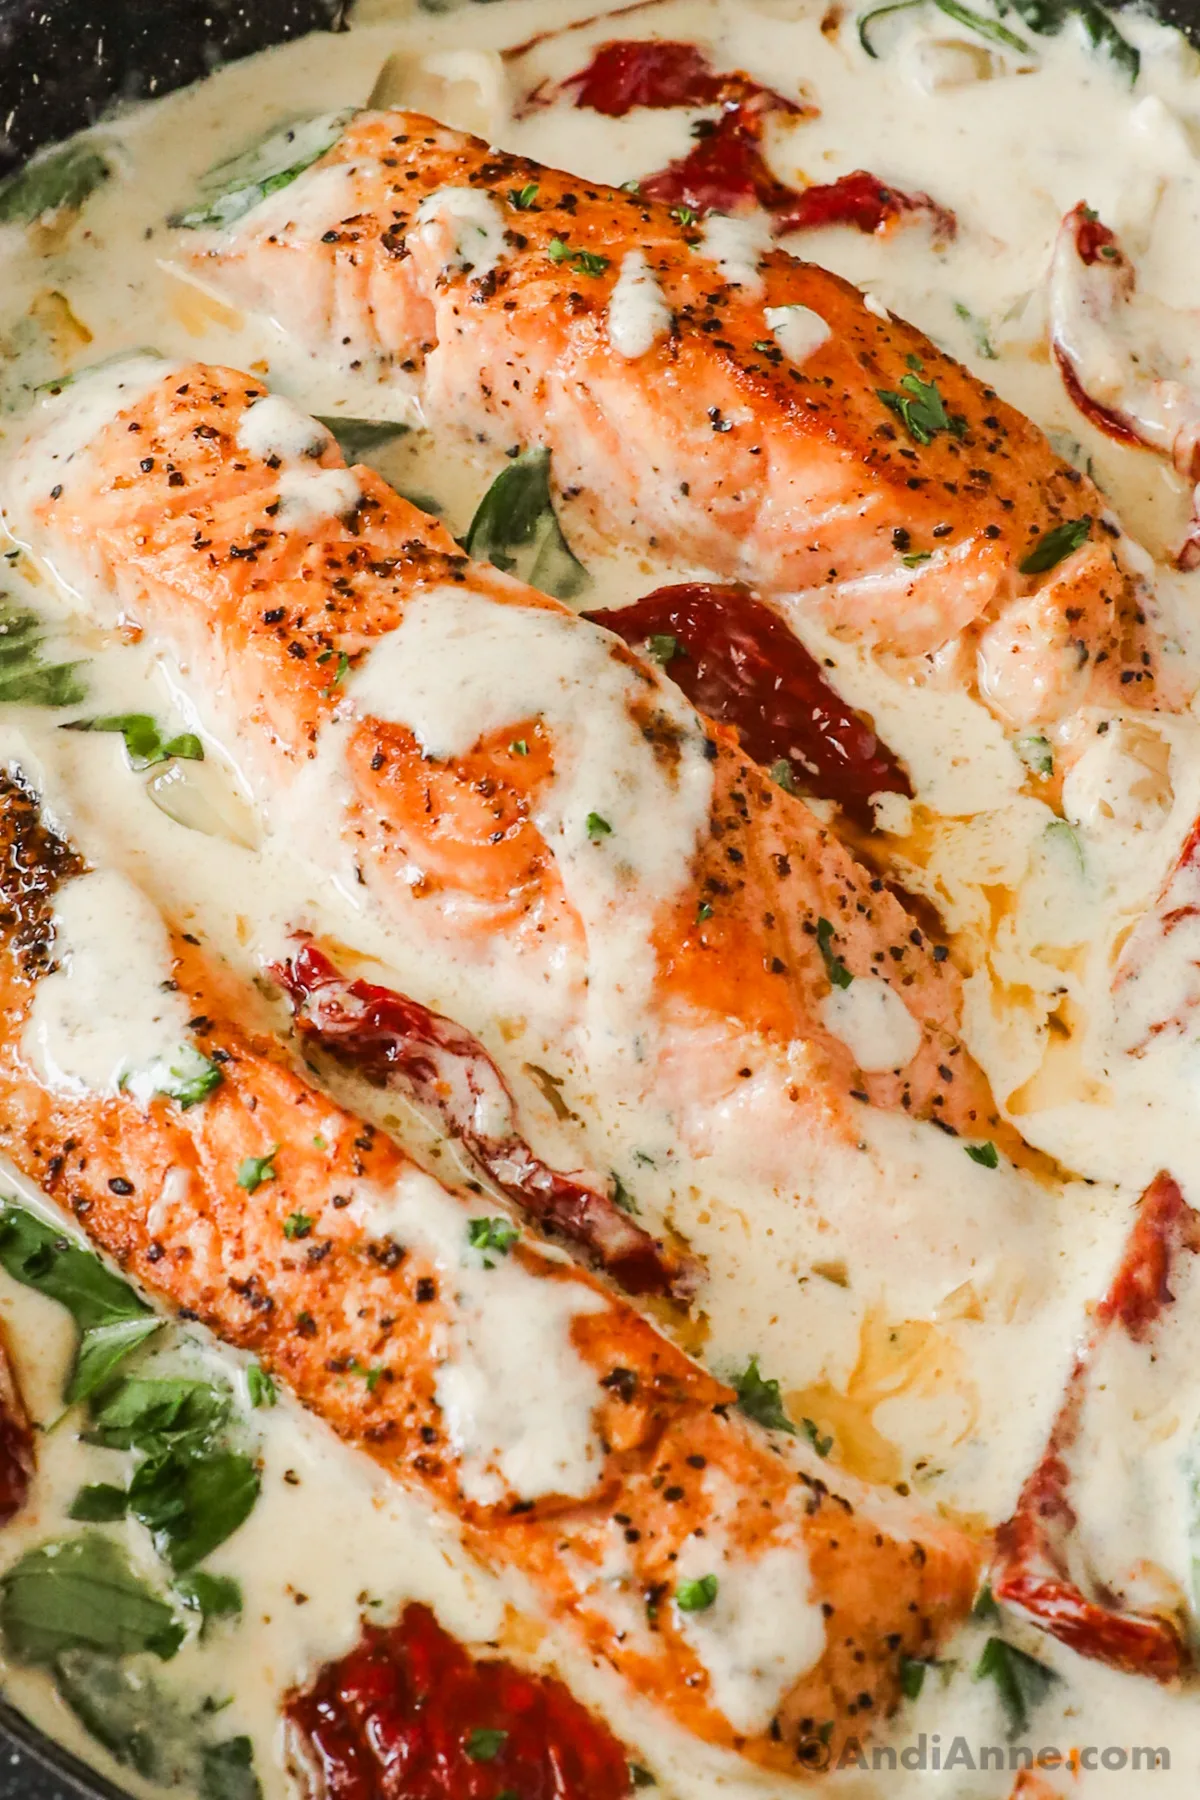 Close up of salmon fillets in a creamy sauce with sun dried tomatoes and pieces of basil.